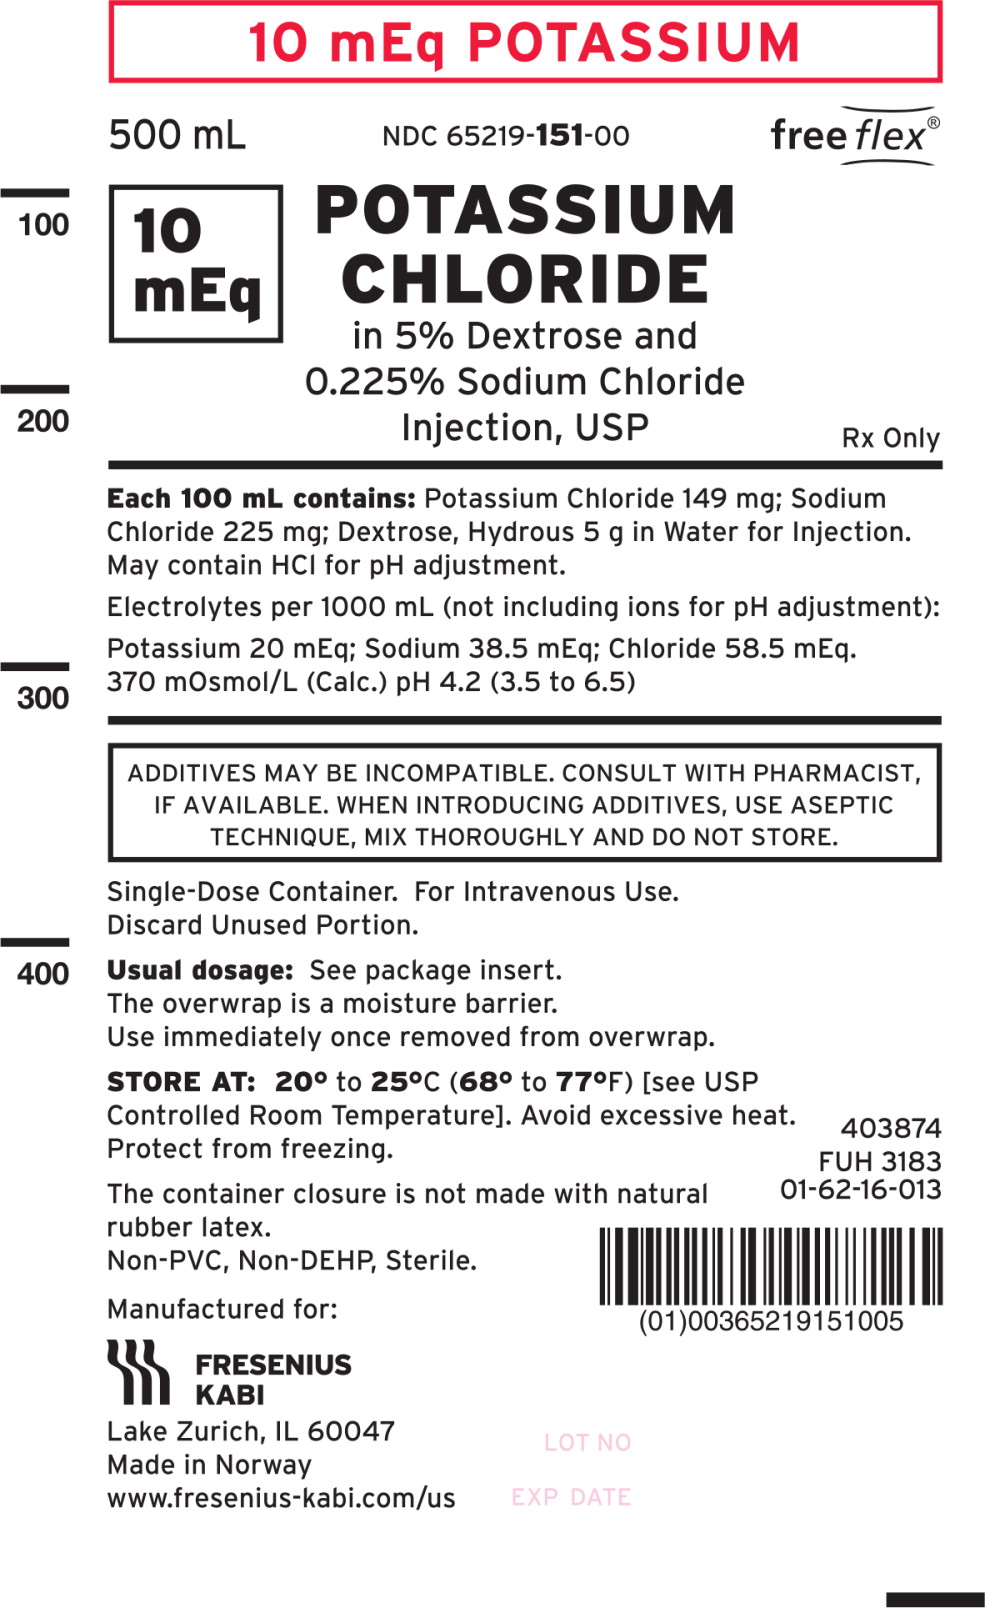 PACKAGE LABEL - PRINCIPAL DISPLAY – Potassium Chloride in 5% Dextrose and 0.225% Sodium Chloride Injection, USP Bag Label
